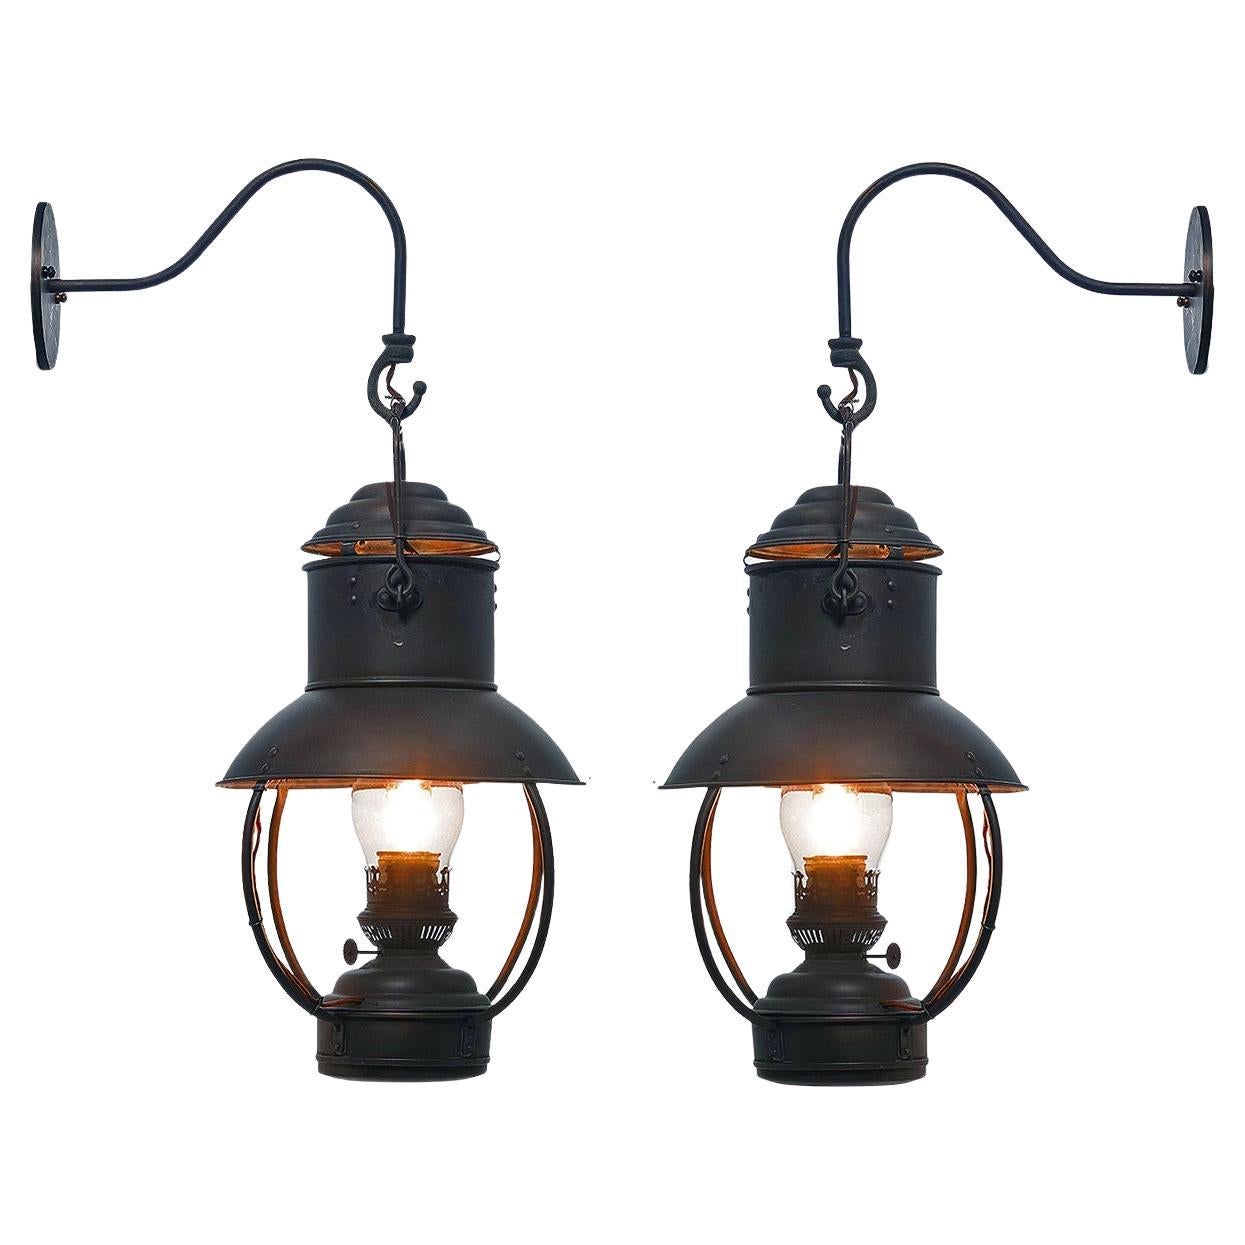 Rustic wall Lanterns For Sale